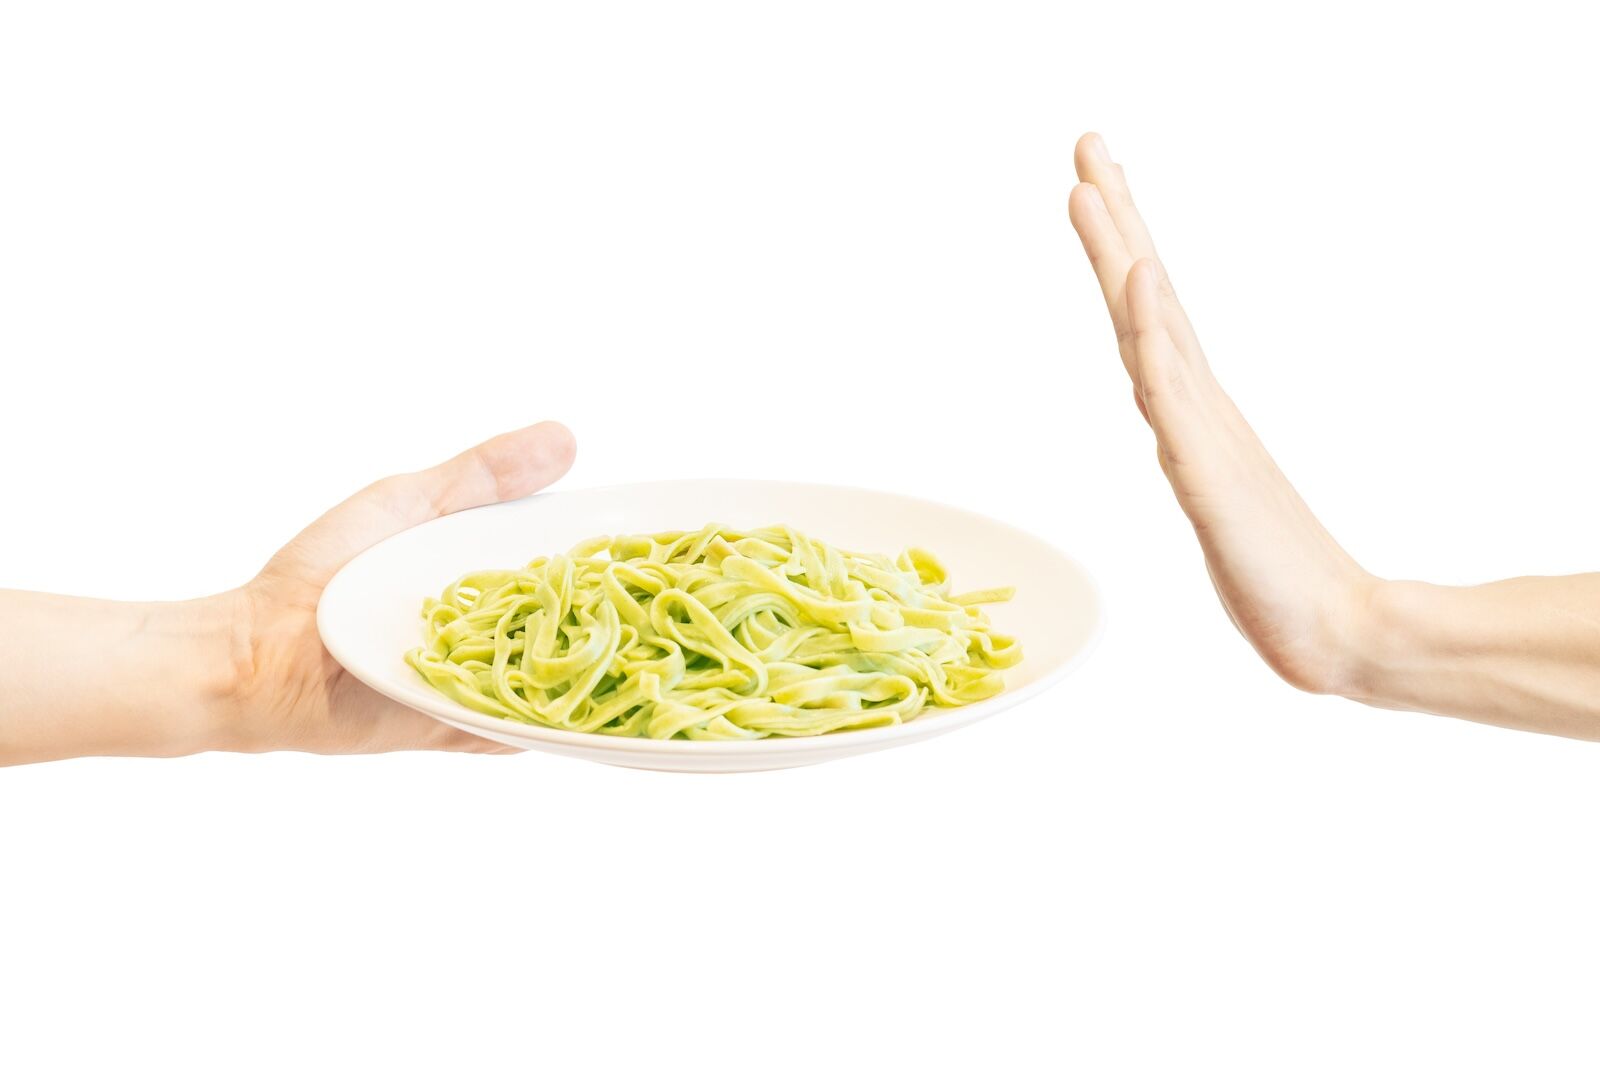 Say,No,Green,Pasta.,Man,Didn’t,Like,The,Pasta,In